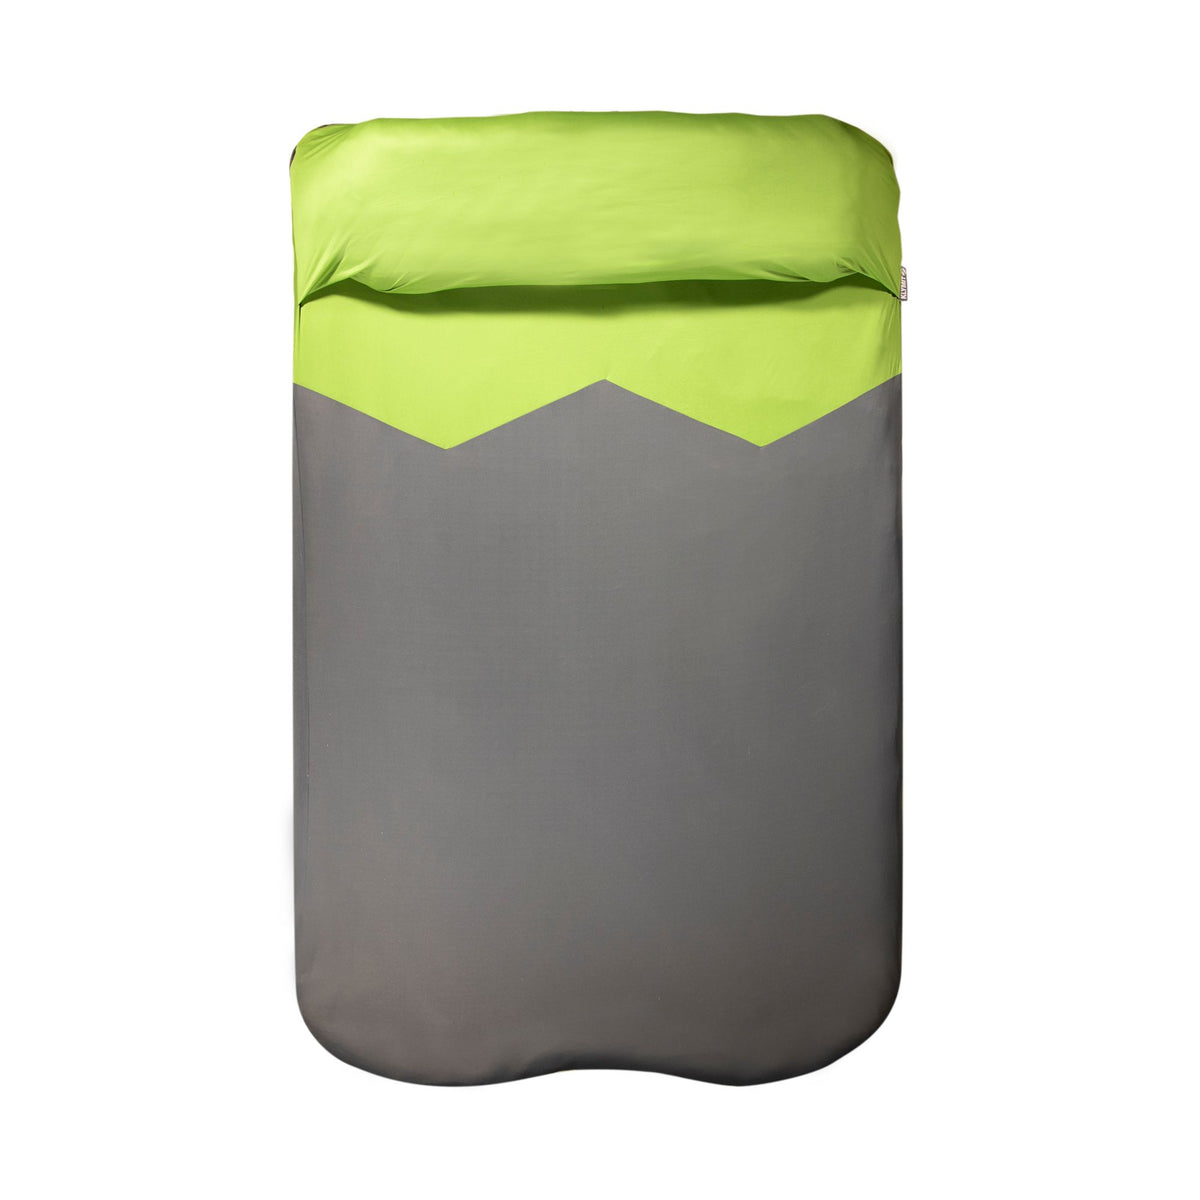 Klymit Double V Sheet Pad Cover